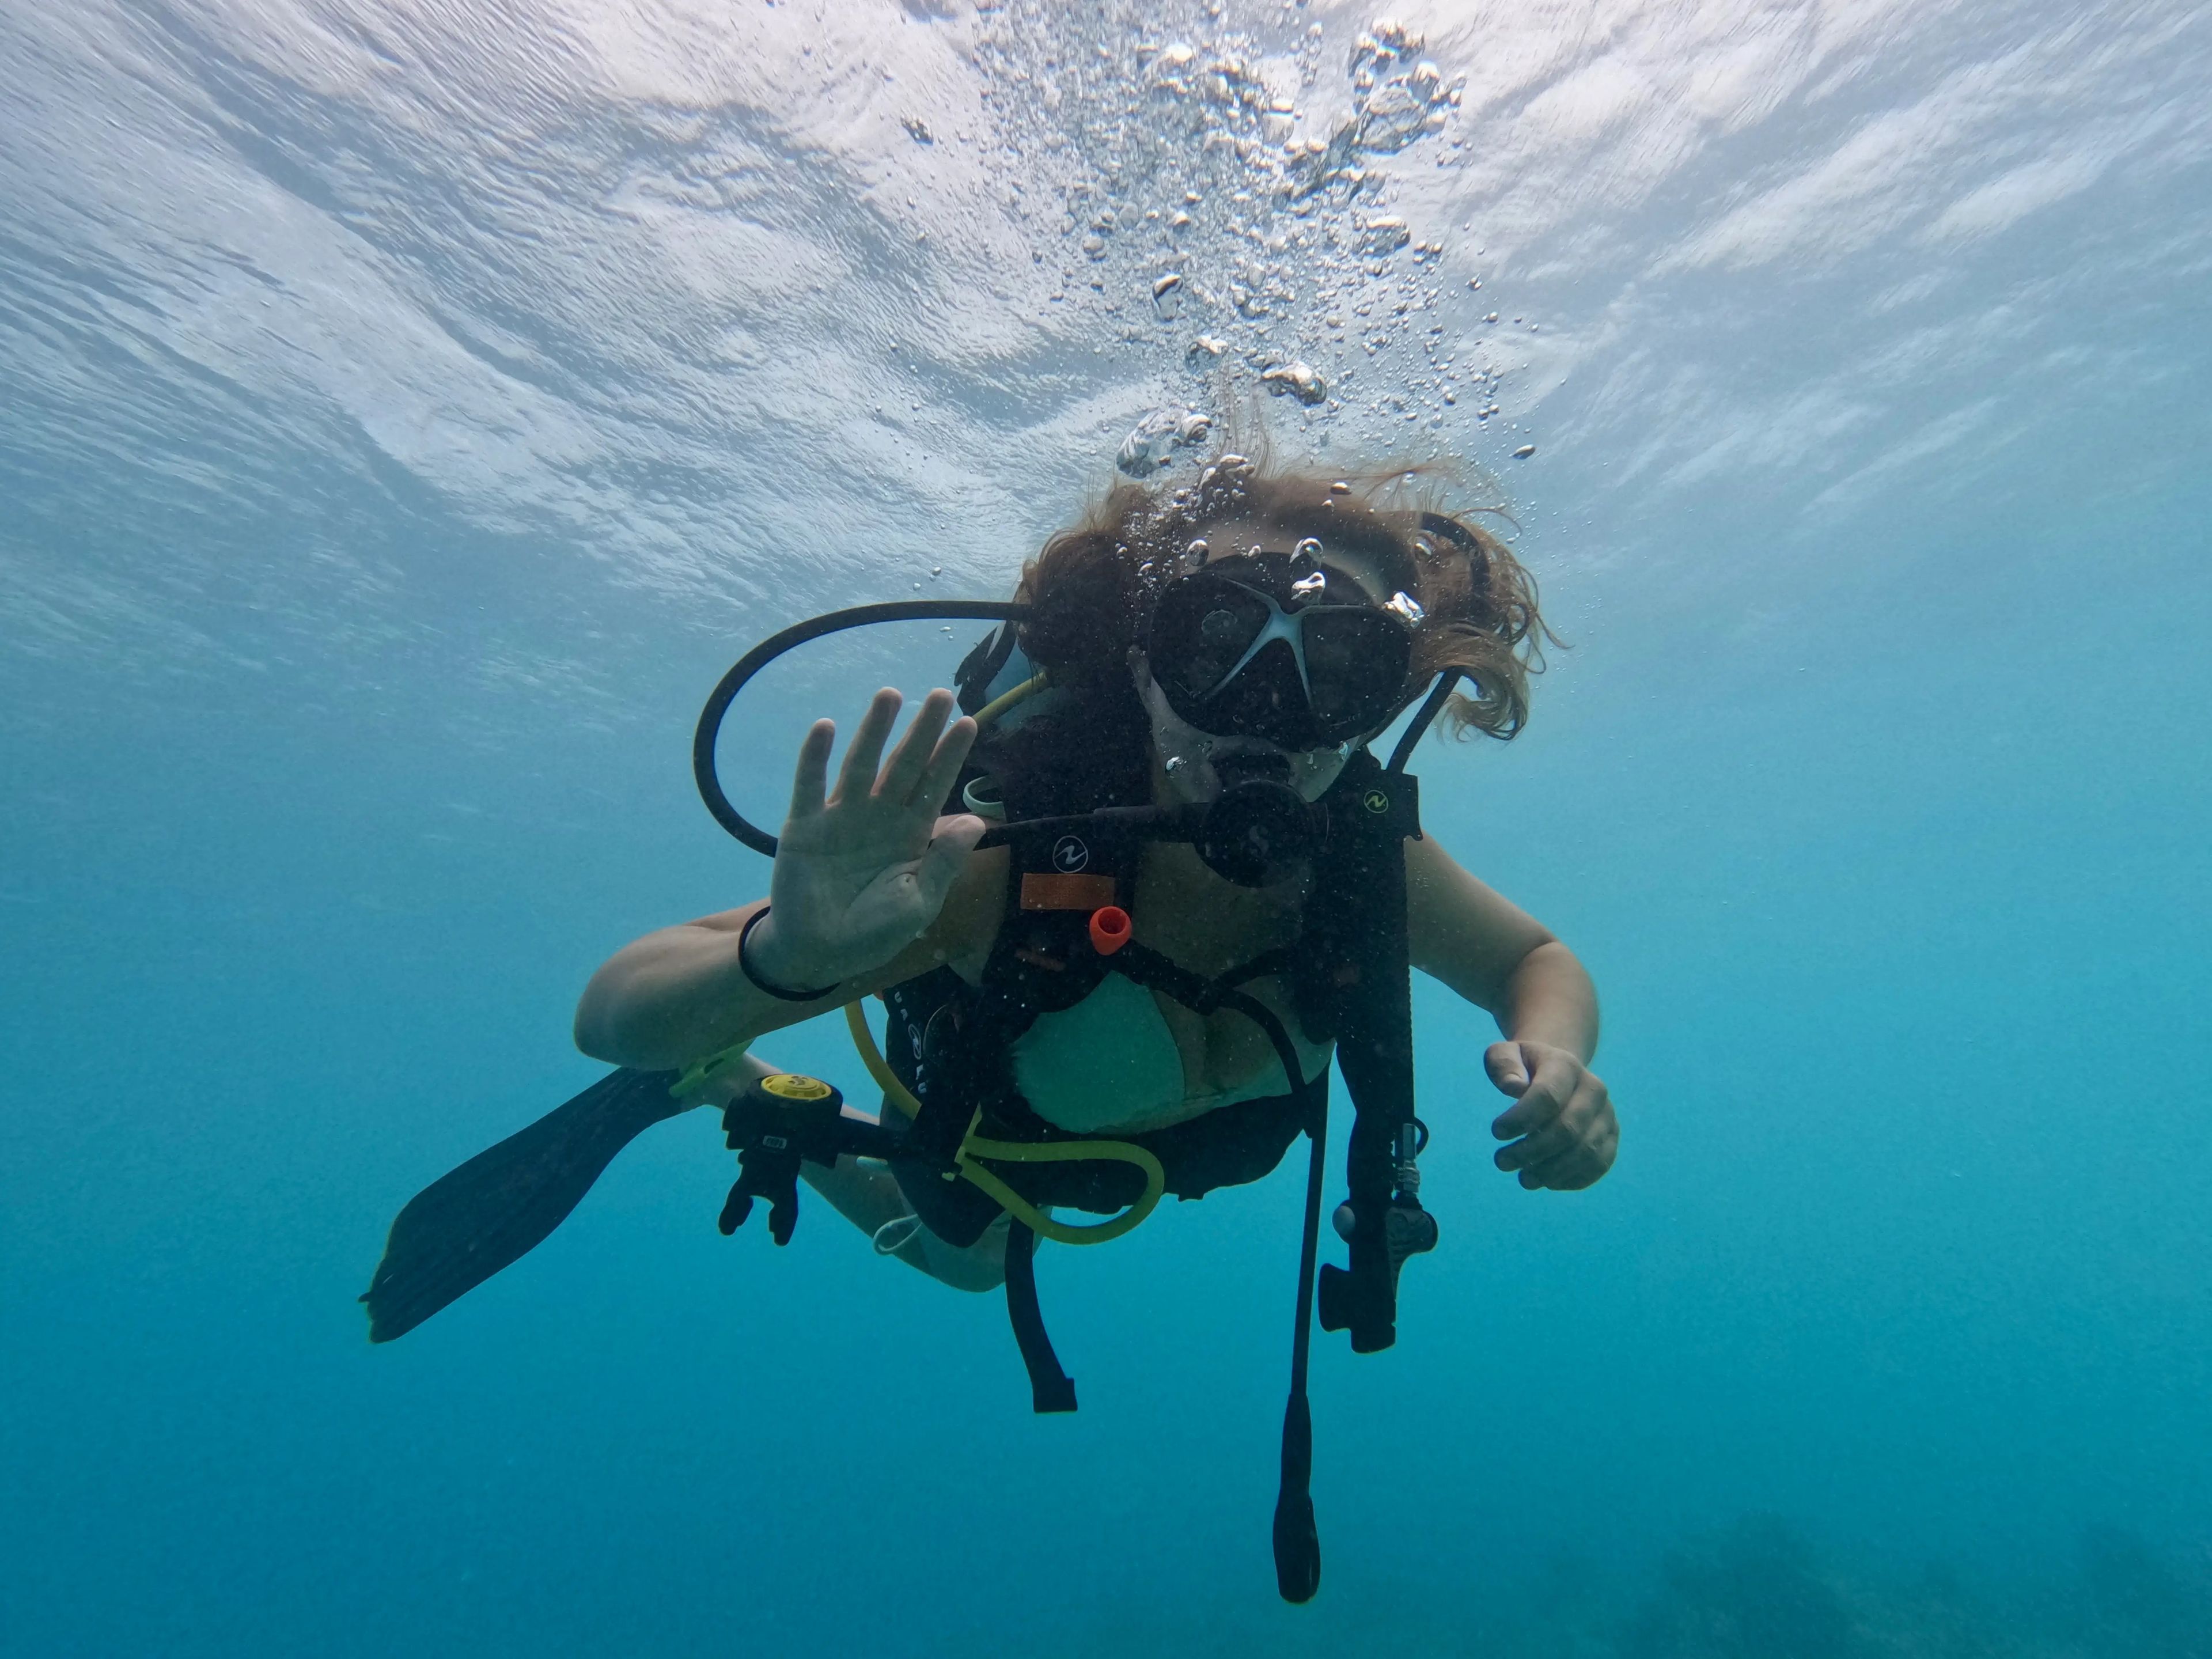 Author Nicole Jordan waving to the camera while snorkeling under water